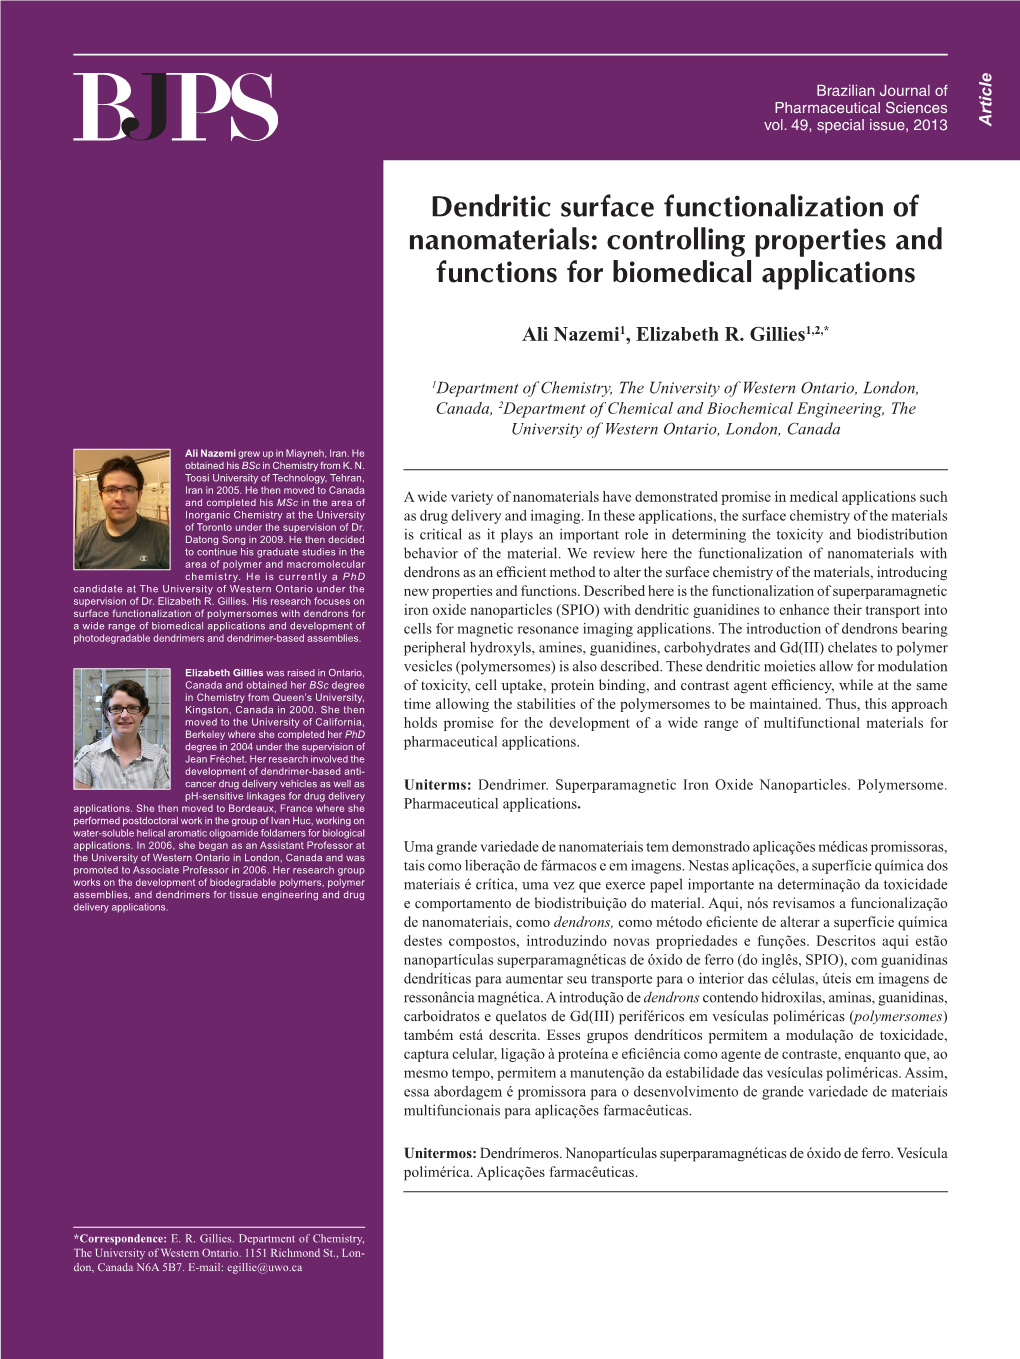 Dendritic Surface Functionalization of Nanomaterials